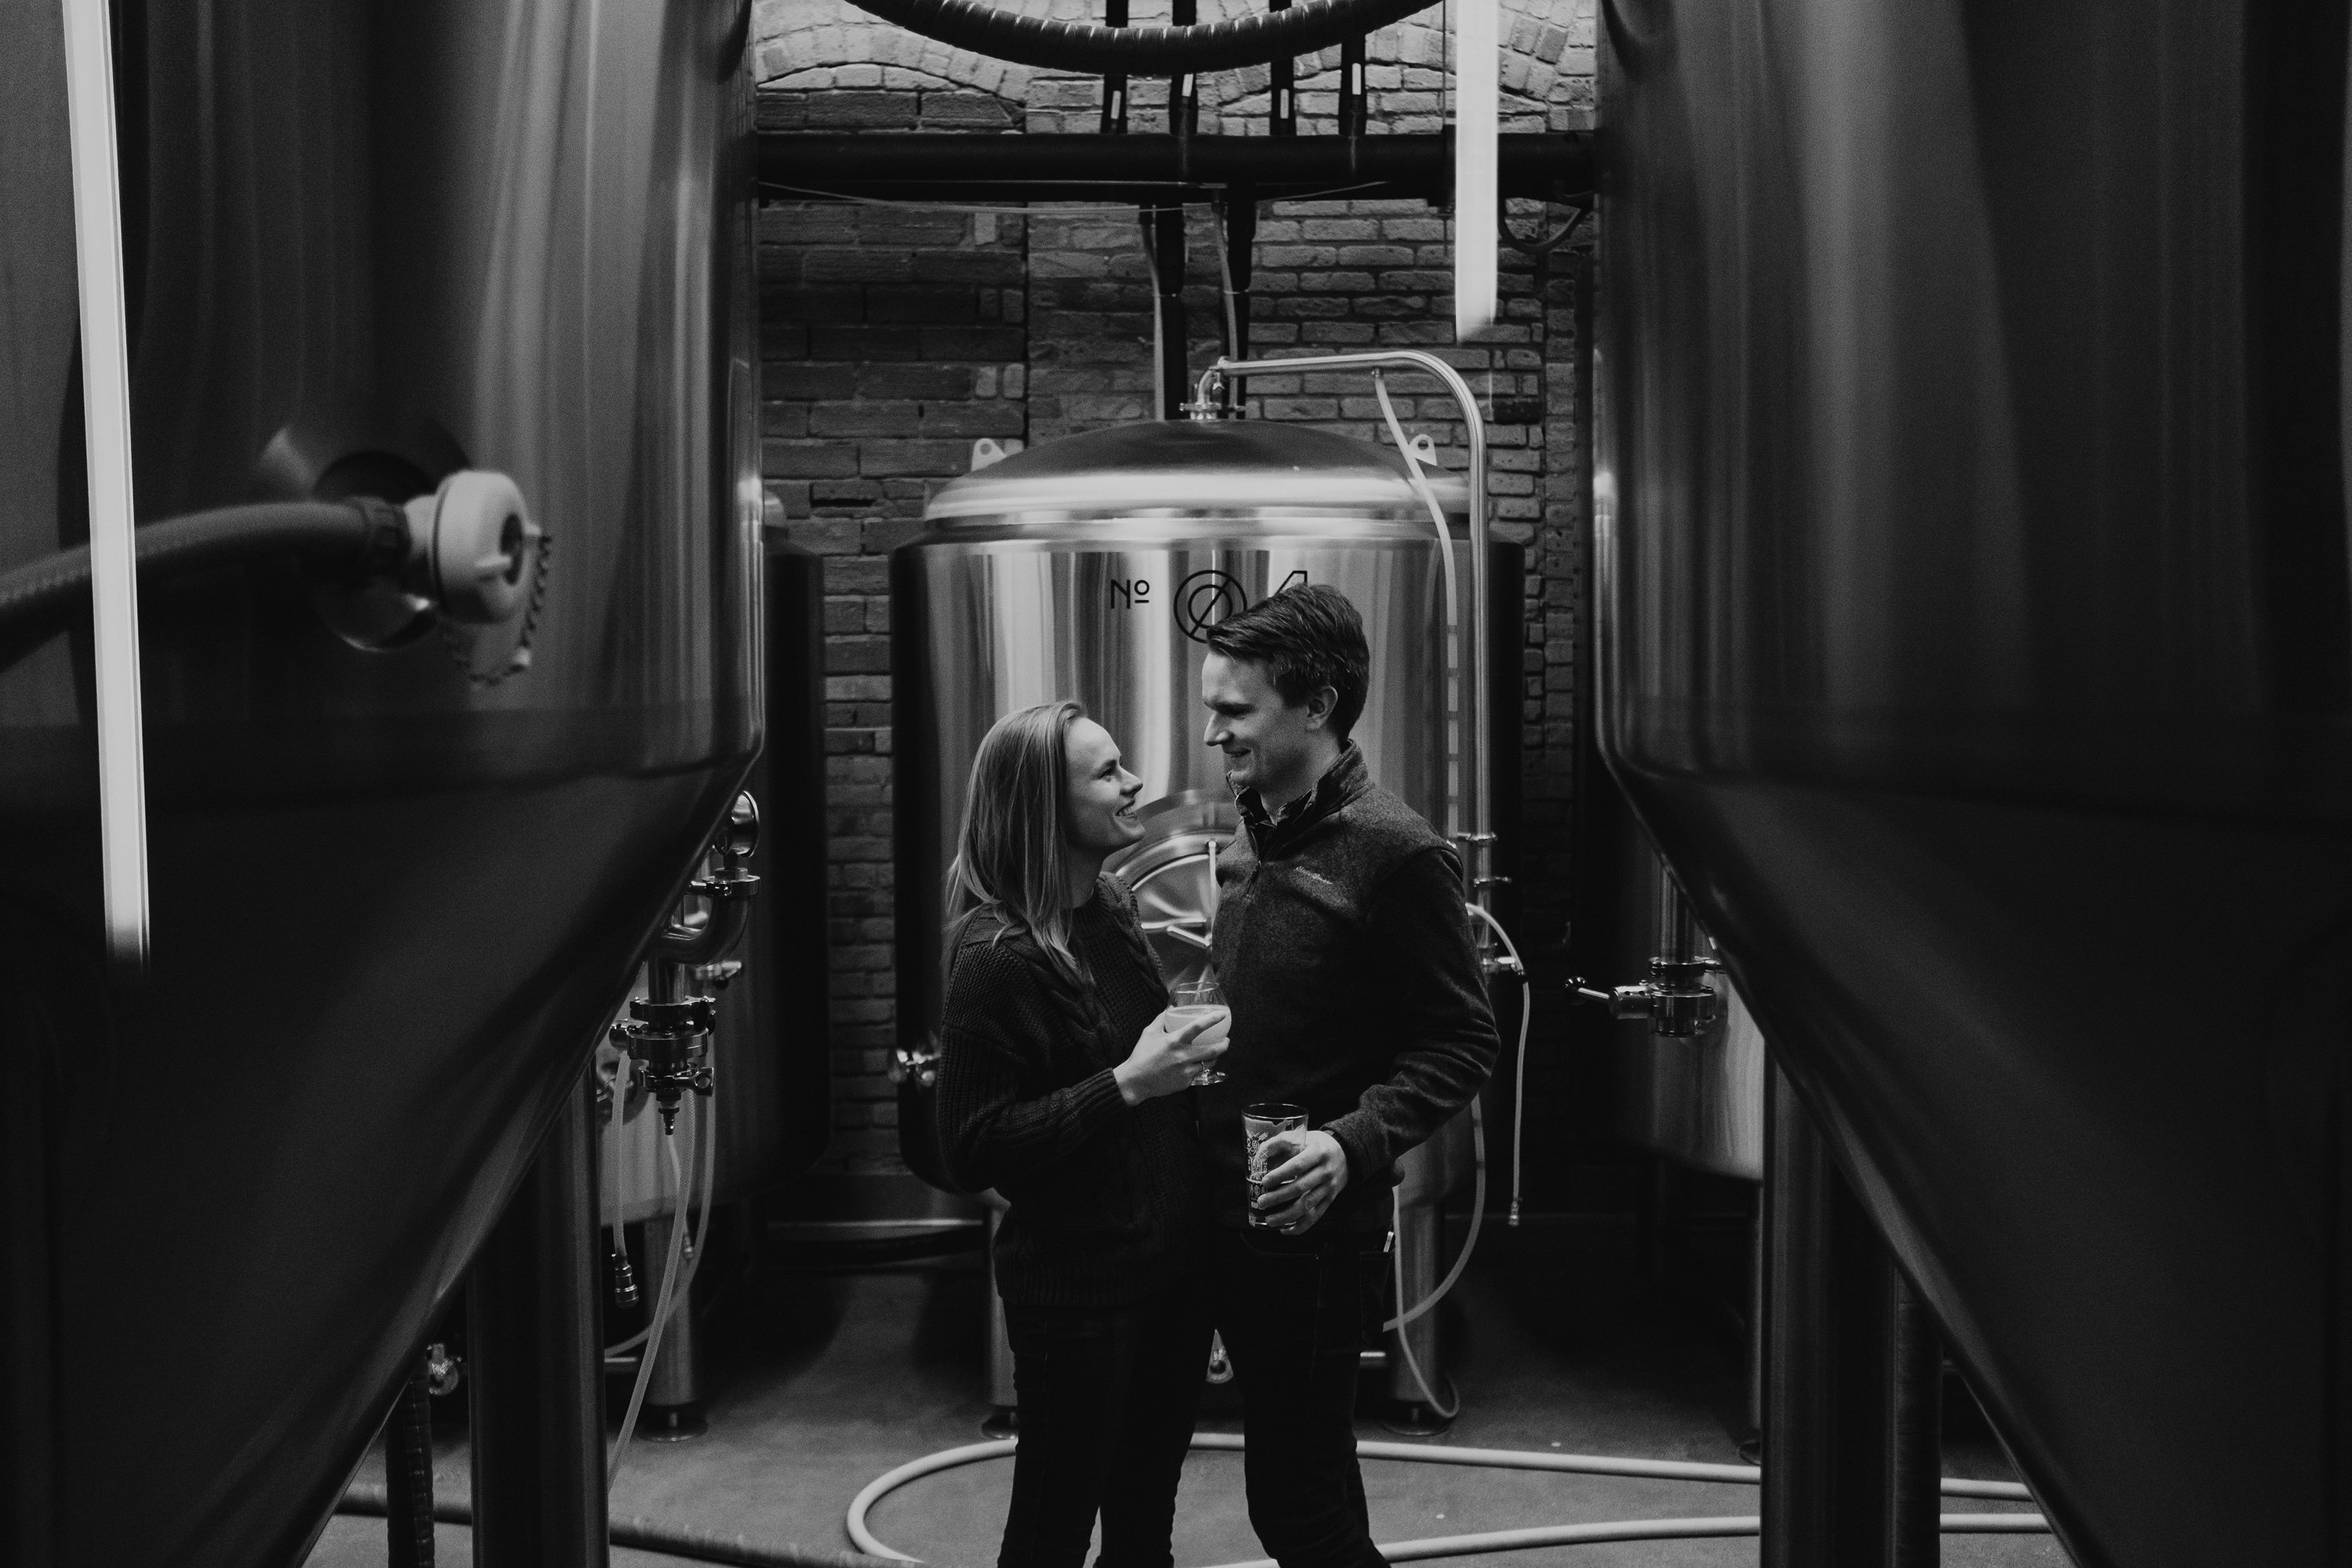 brewery engagement session,minneapolis engagement session,saint anthony main engagement session,wilde cafe engagement session,saint anthony main minneapolis,minneapolis wedding photographer